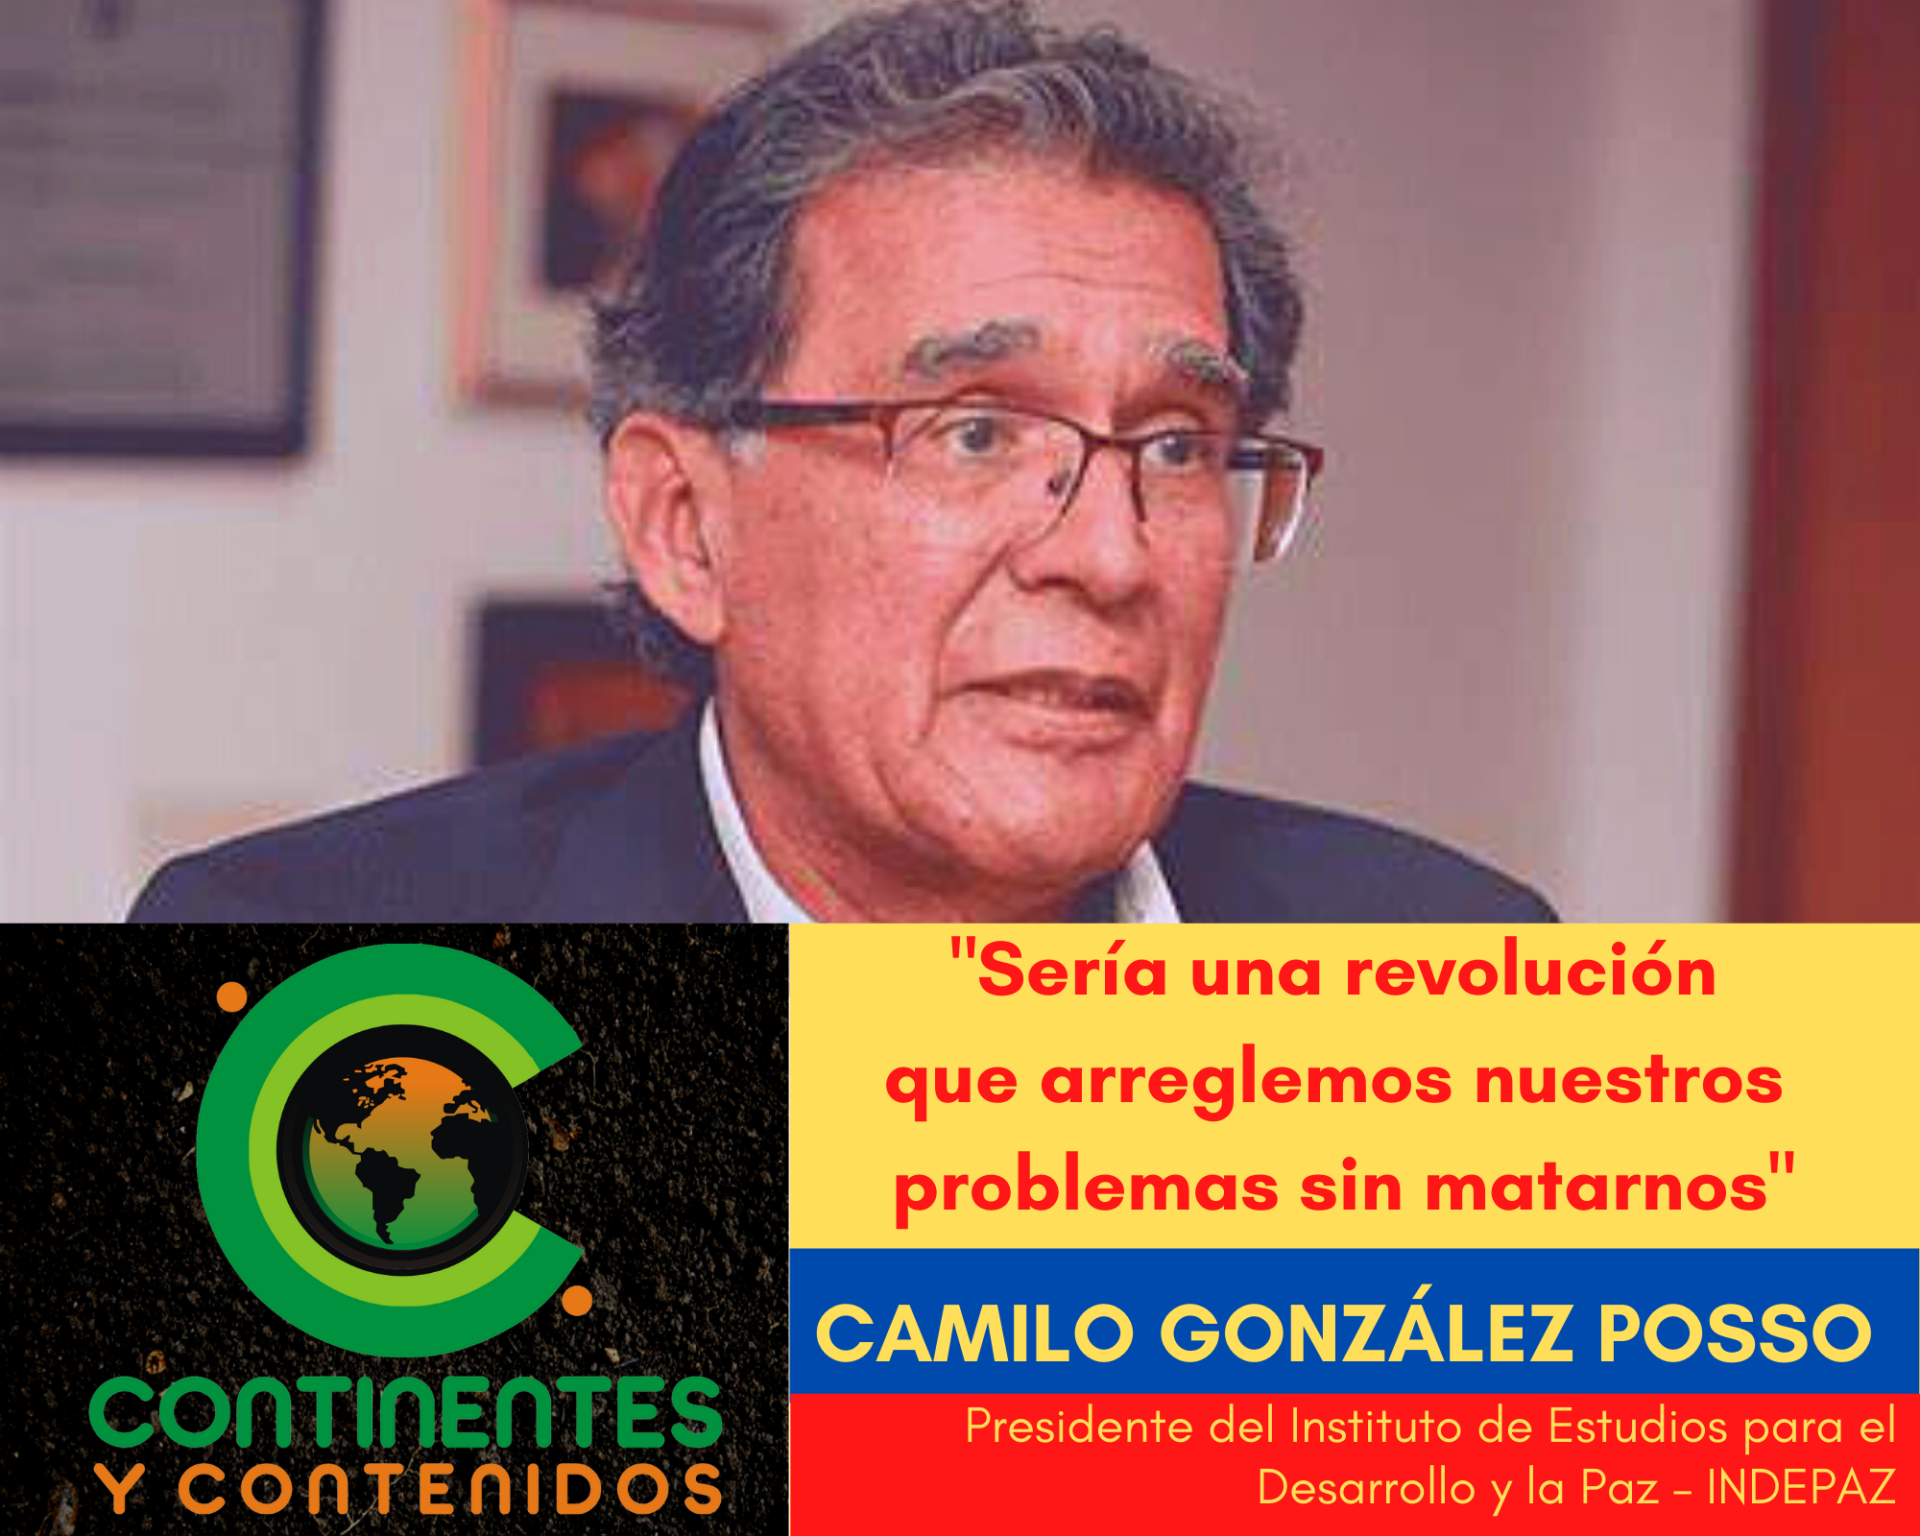 Camilo González Posso "In Colombia there is a non-constitutional state of affairs, there is no democratic regime".